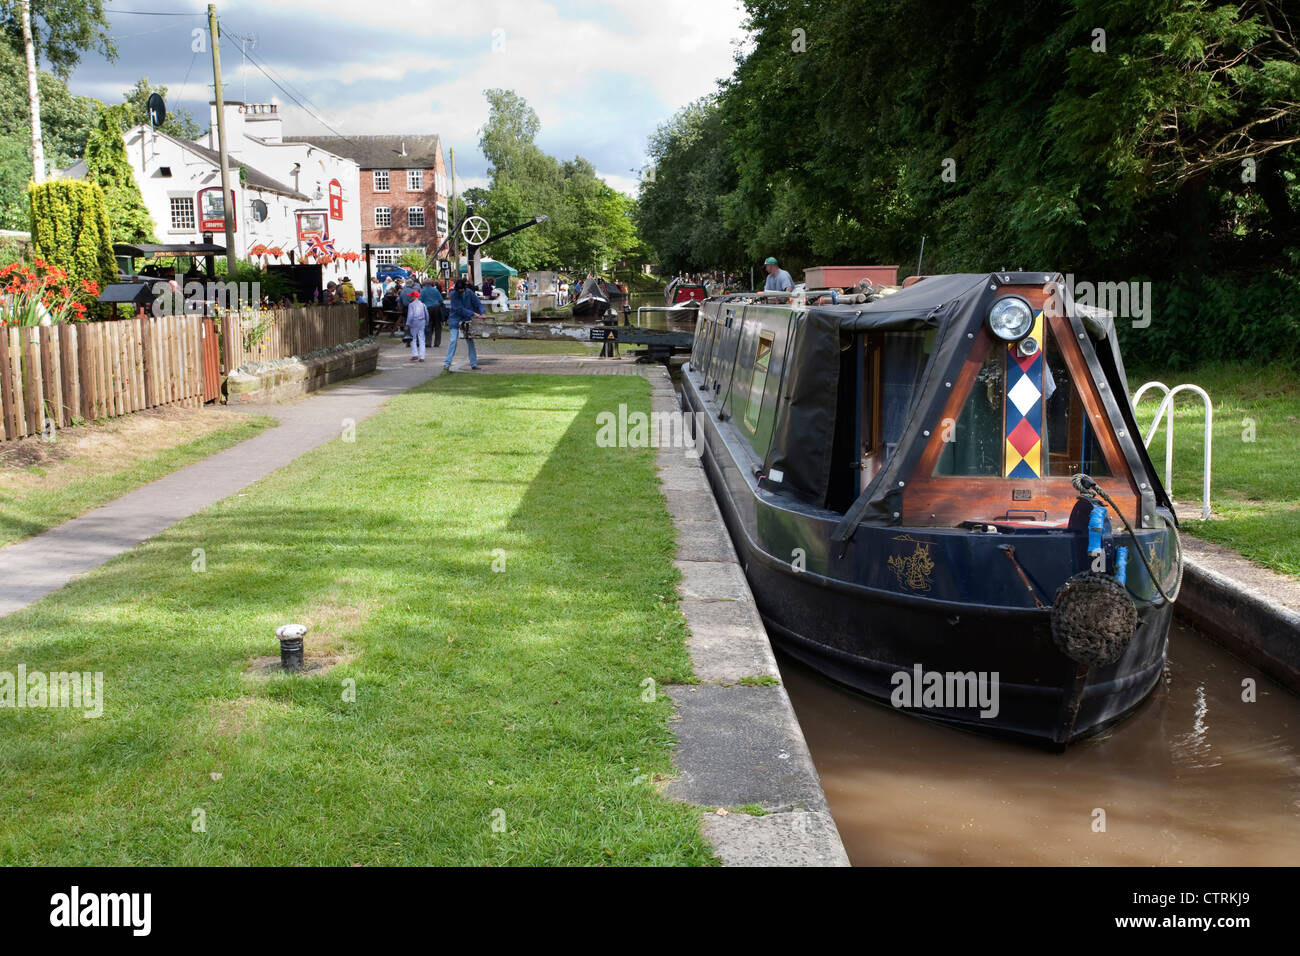 A canal boat approaching locks on the Shropshire Union canal near the Shroppie Fly public house, Audlem, Cheshire. Stock Photo